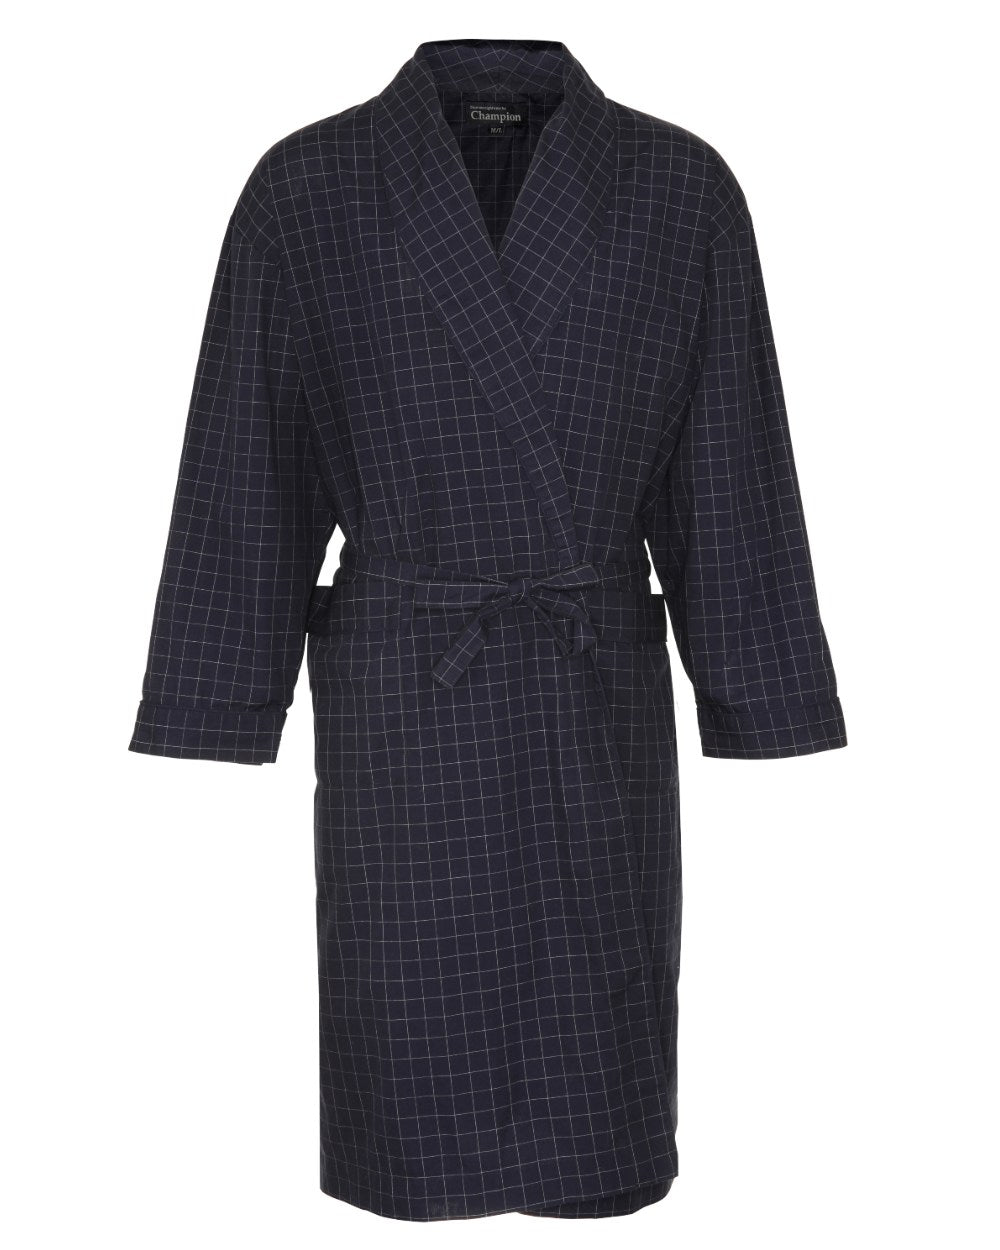 Navy Coloured Champion Ava Fleece Dressing Gown On A White Background 